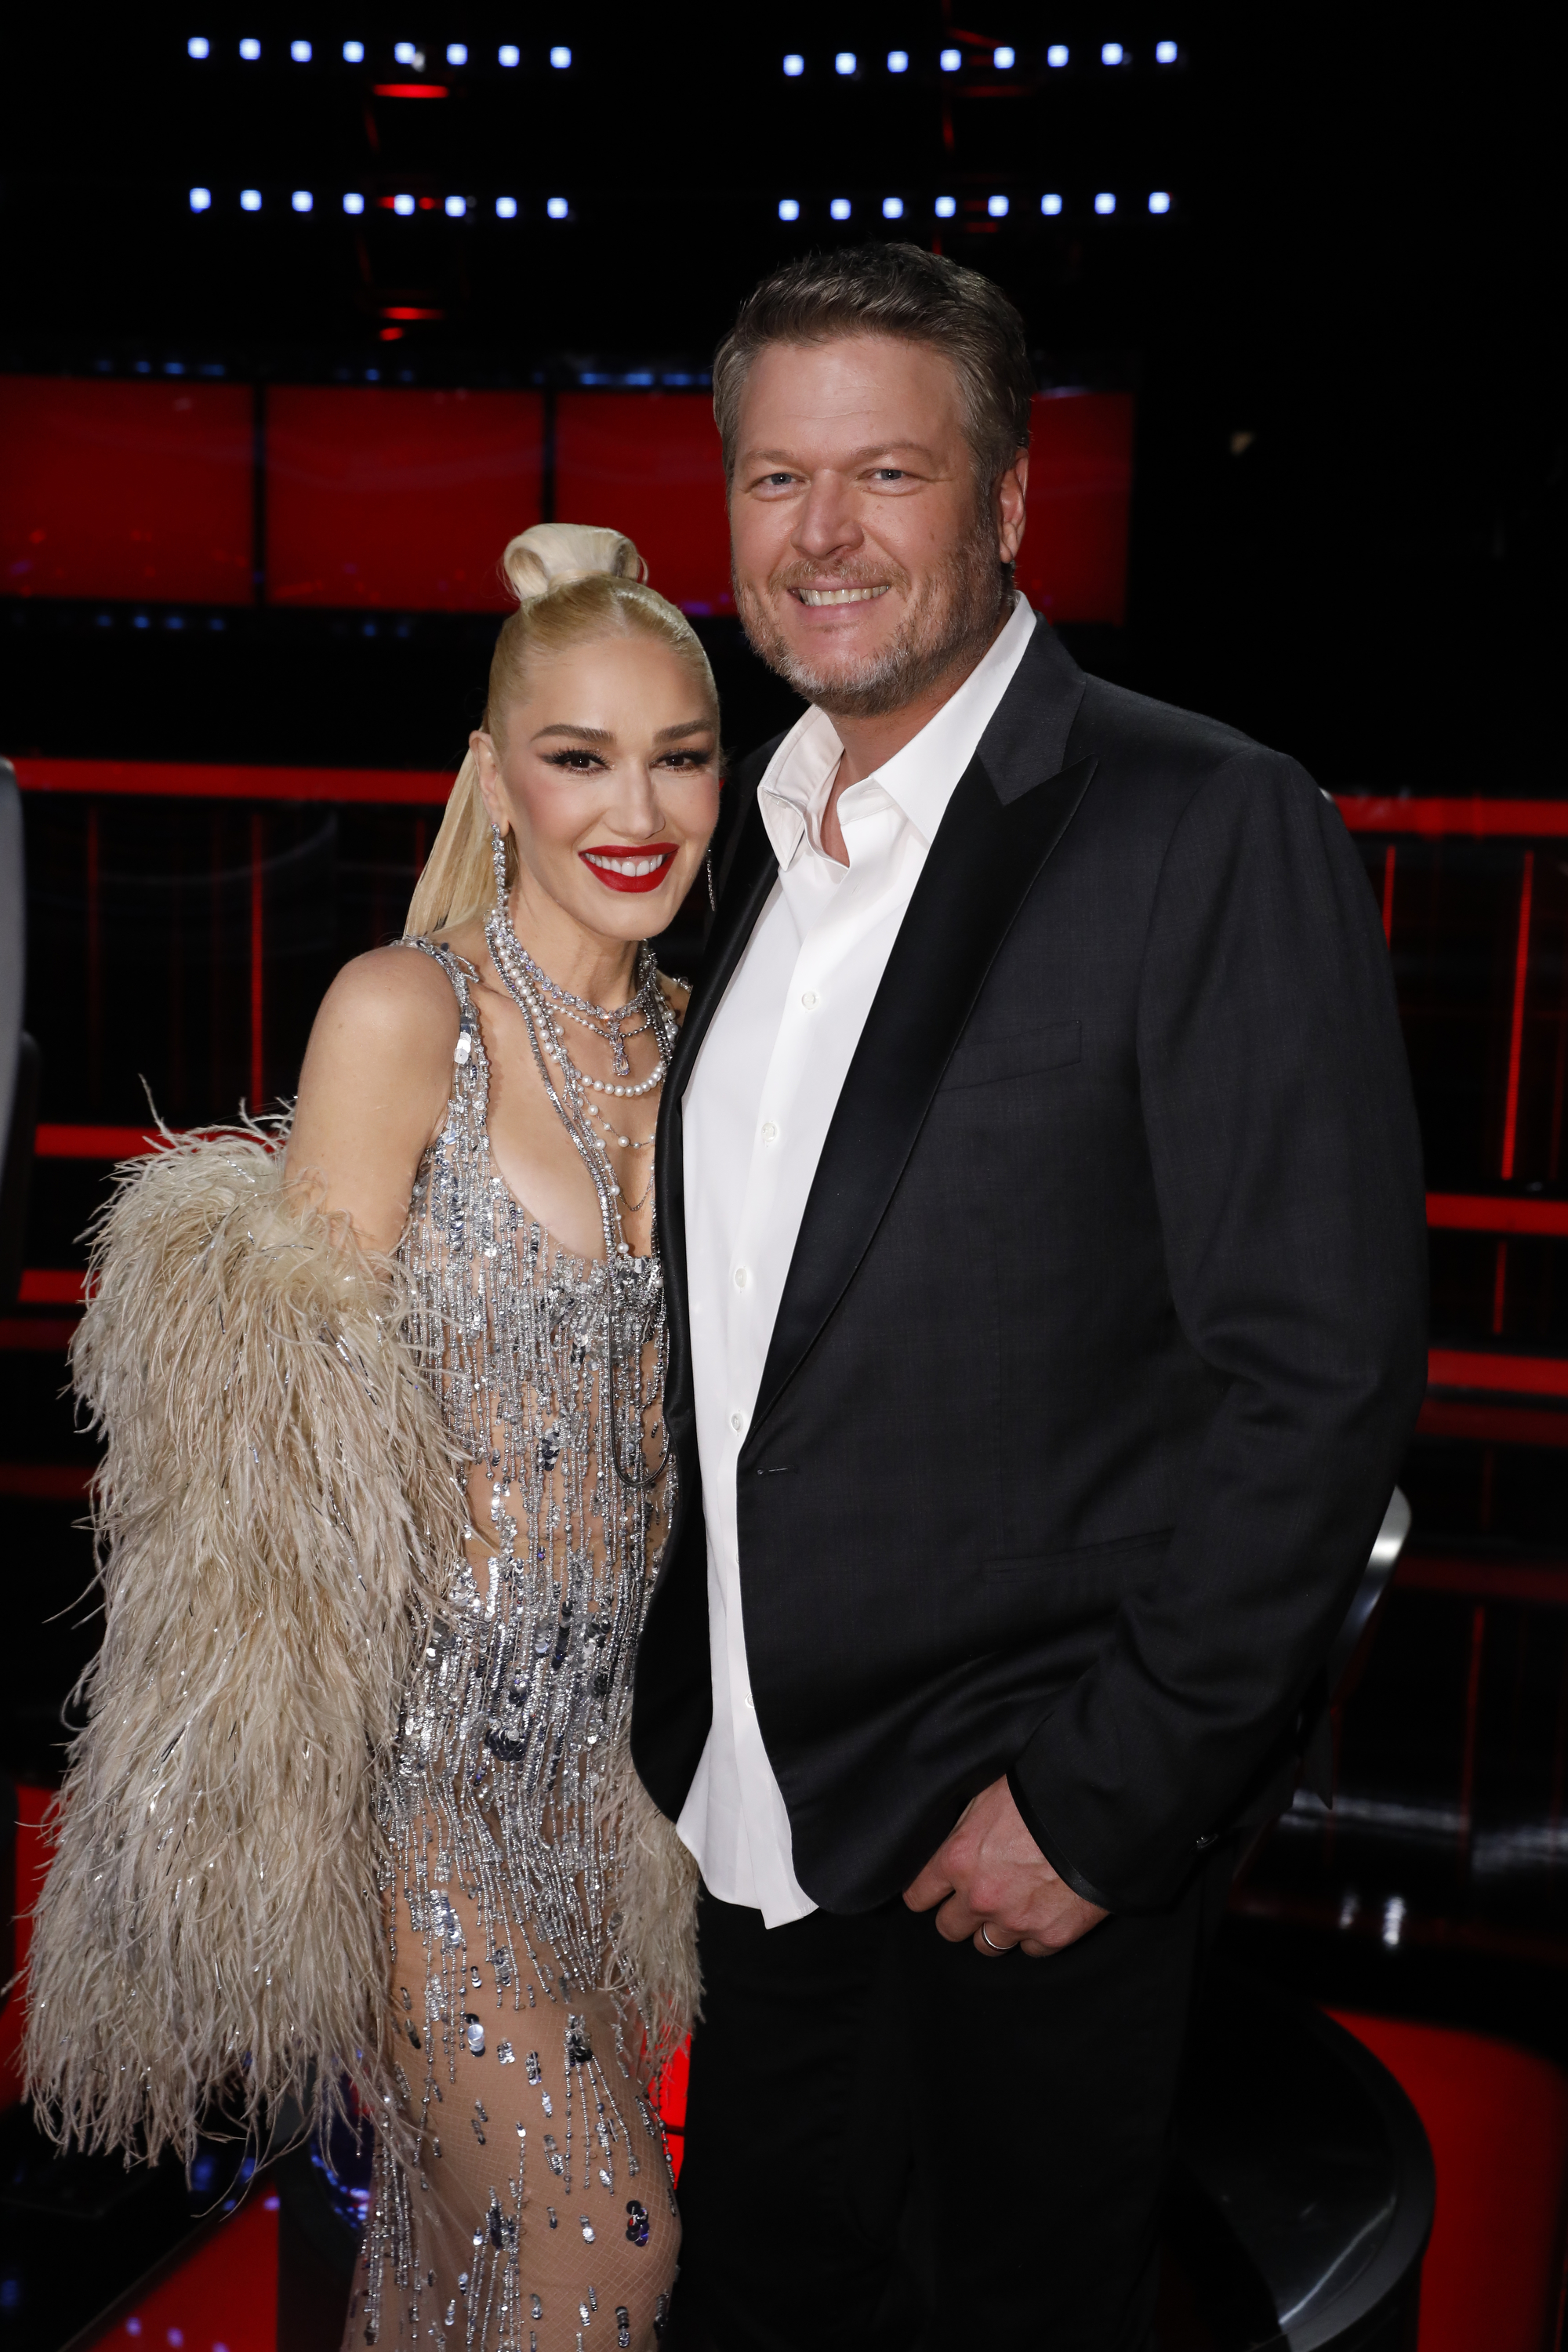 Gwen and Blake tied the knot in 2021